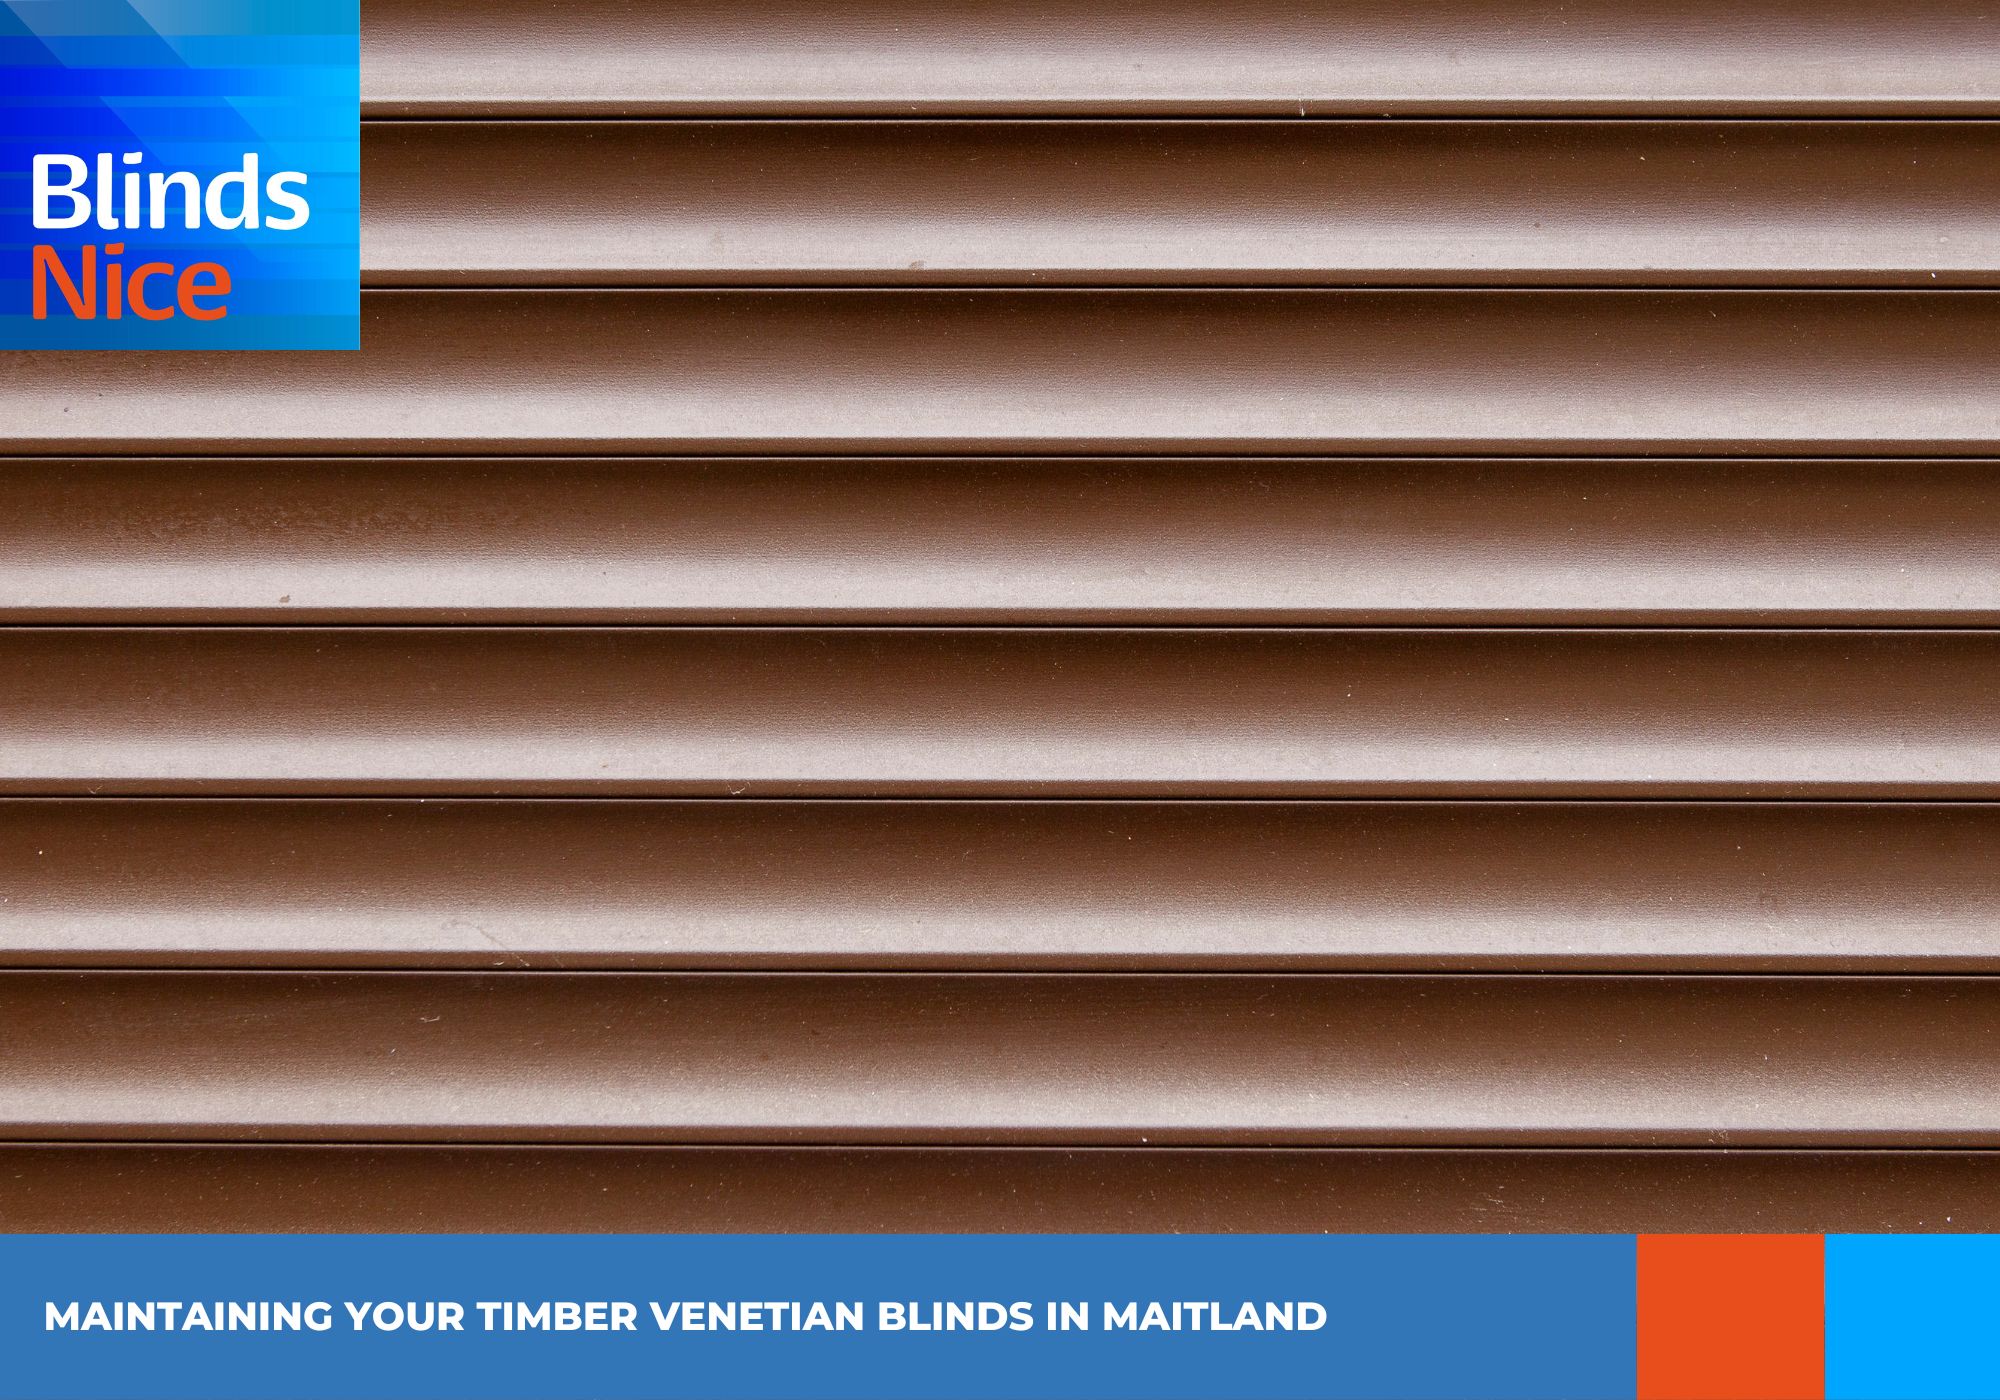 Maintaining Your Timber Venetian Blinds in Maitland